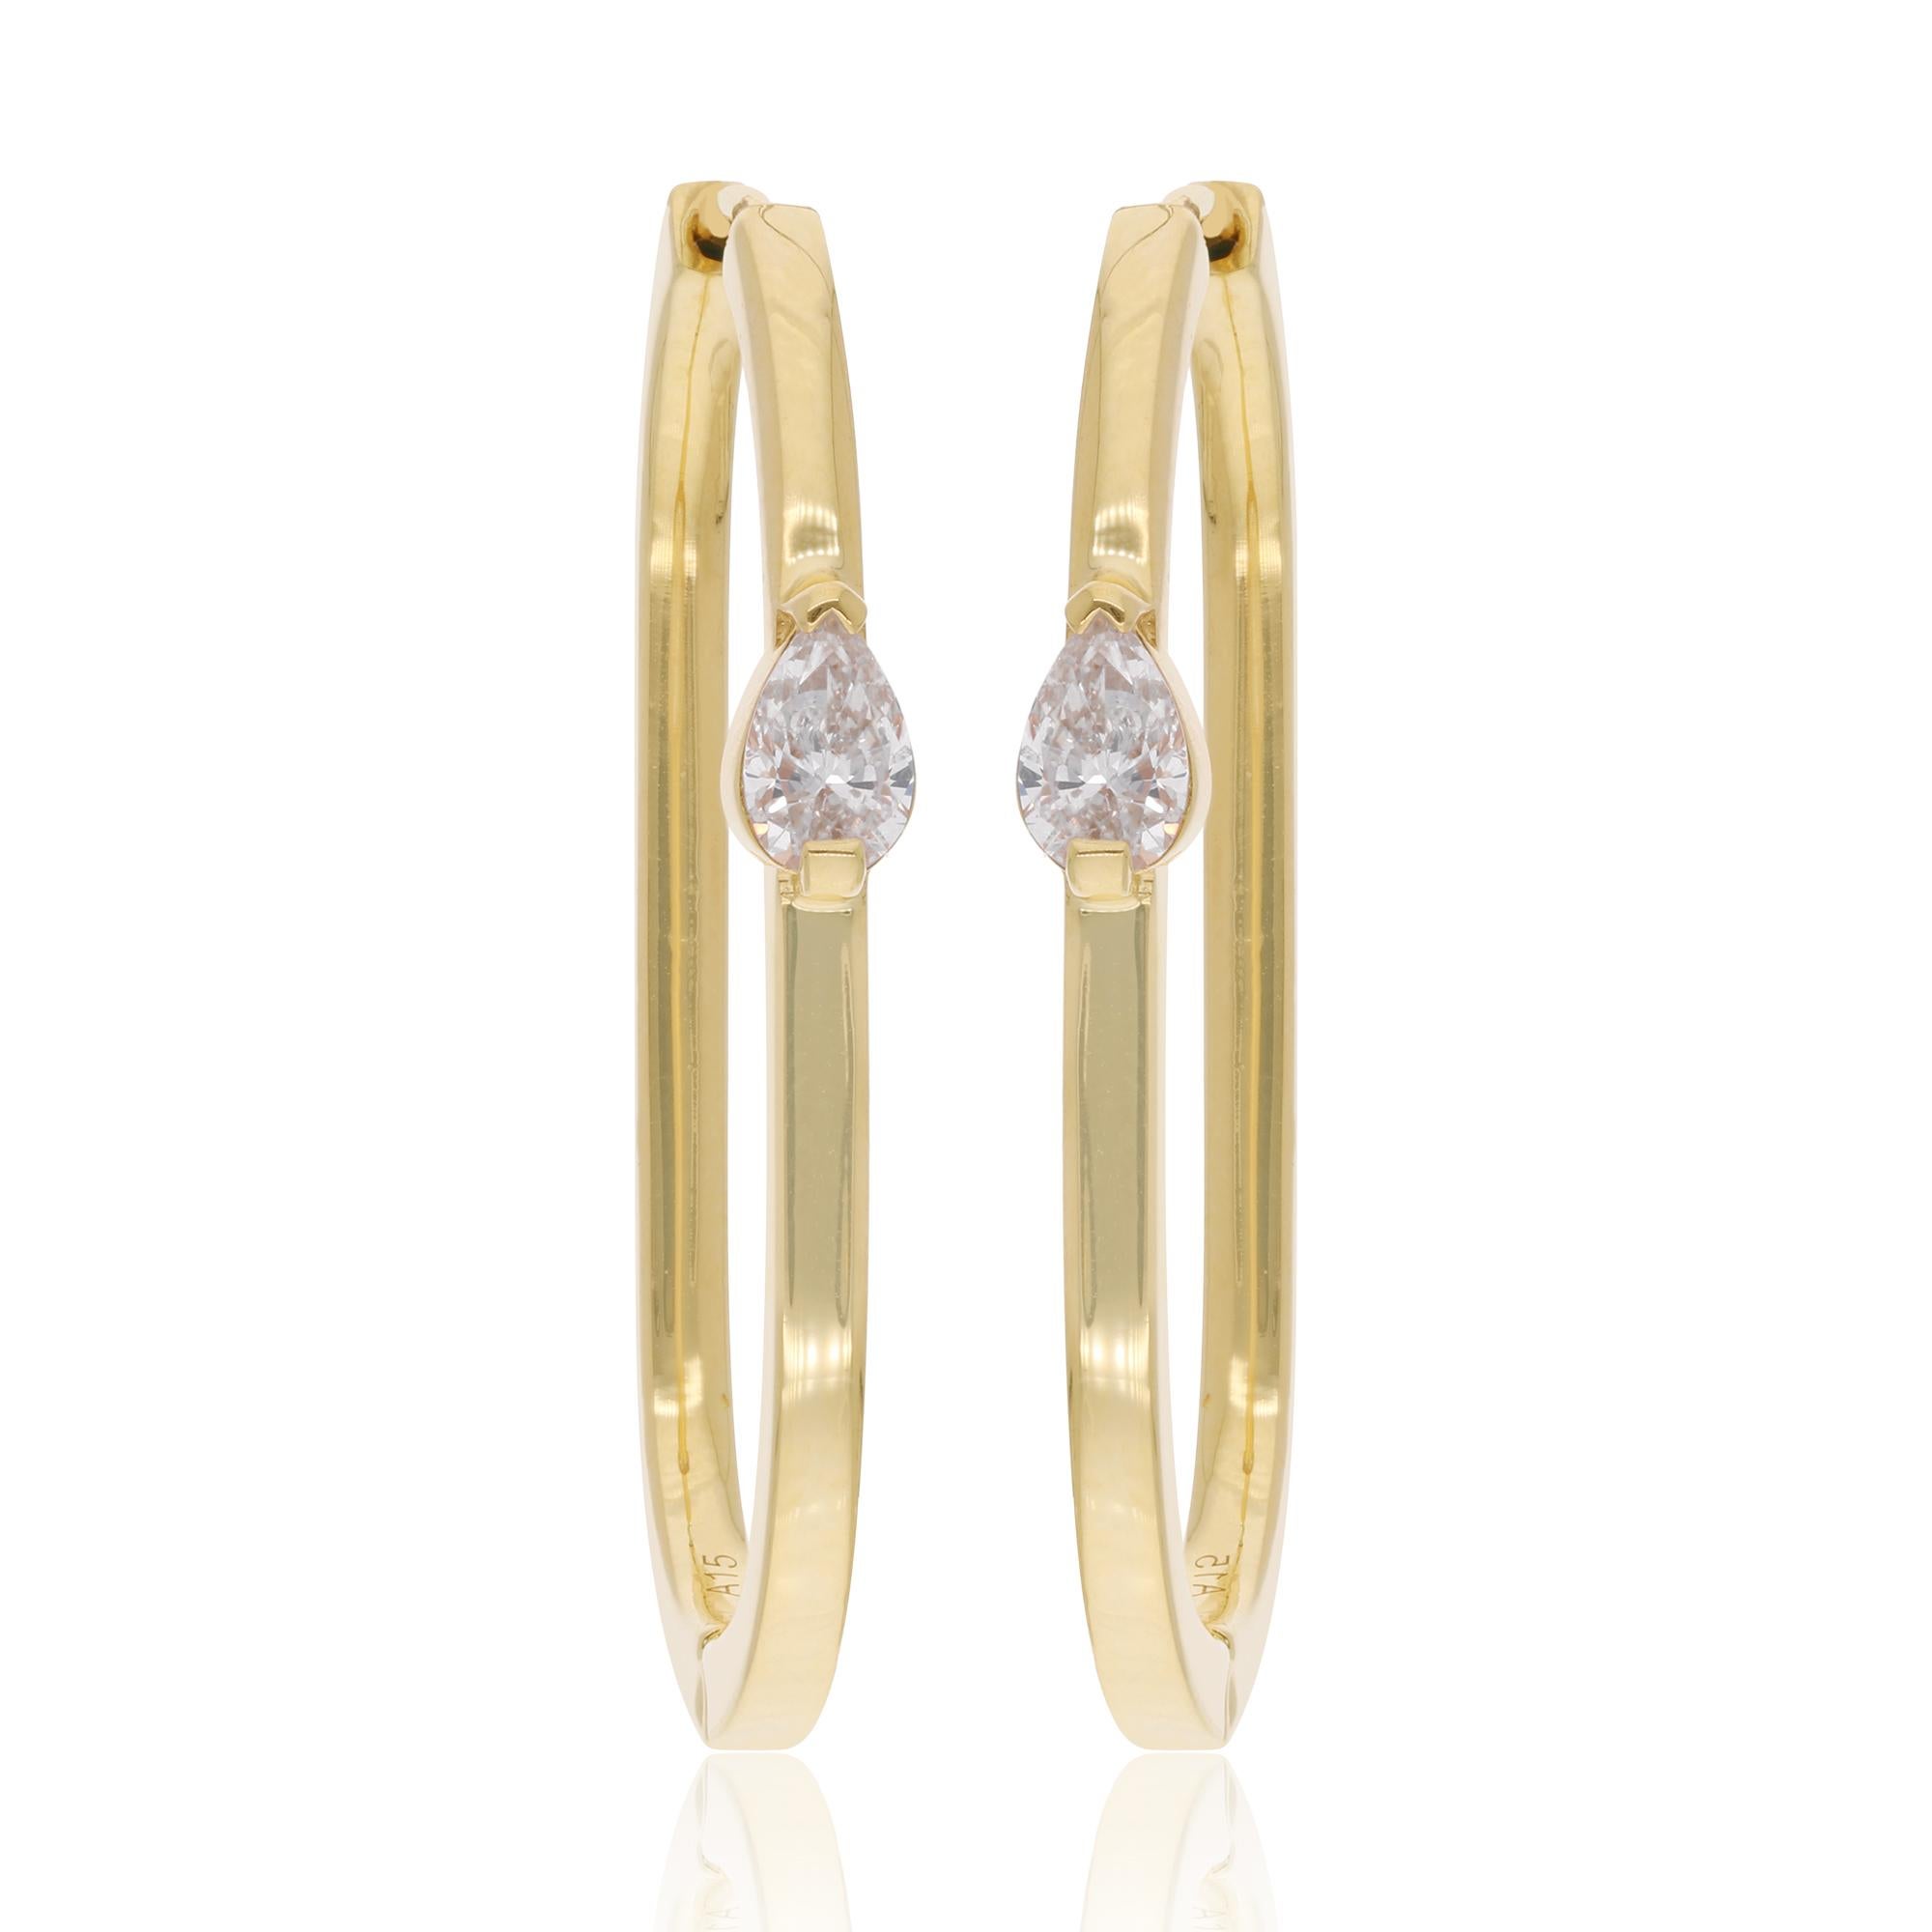 Item Code :- SEE-14530
Gross Wt. :- 6.93 gm
18k Yellow Gold Wt. :- 6.79 gm
Natural Diamond Wt. :- 0.71 Ct. (AVERAGE DIAMOND CLARITY SI1-SI2 AND Colour H-I)
Earrings Size :- 34 mm approx.

✦ Sizing
.....................
We can adjust most items to